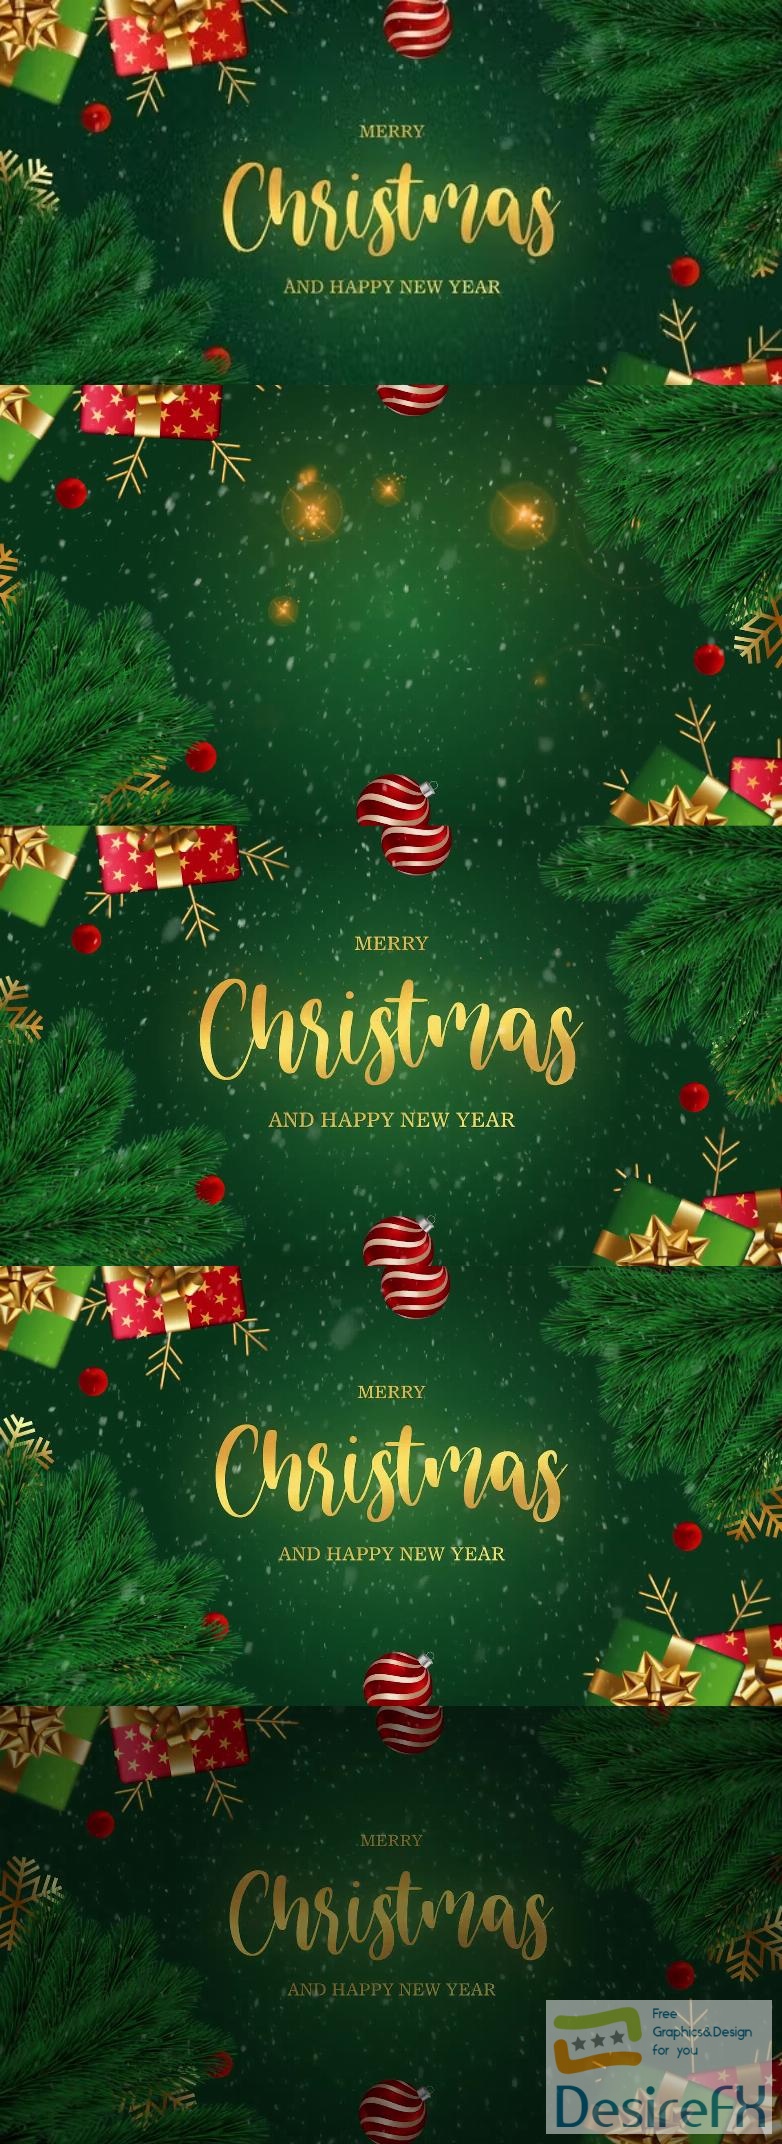 Videohive Merry Christmas And Happy New Year Intro 41795670